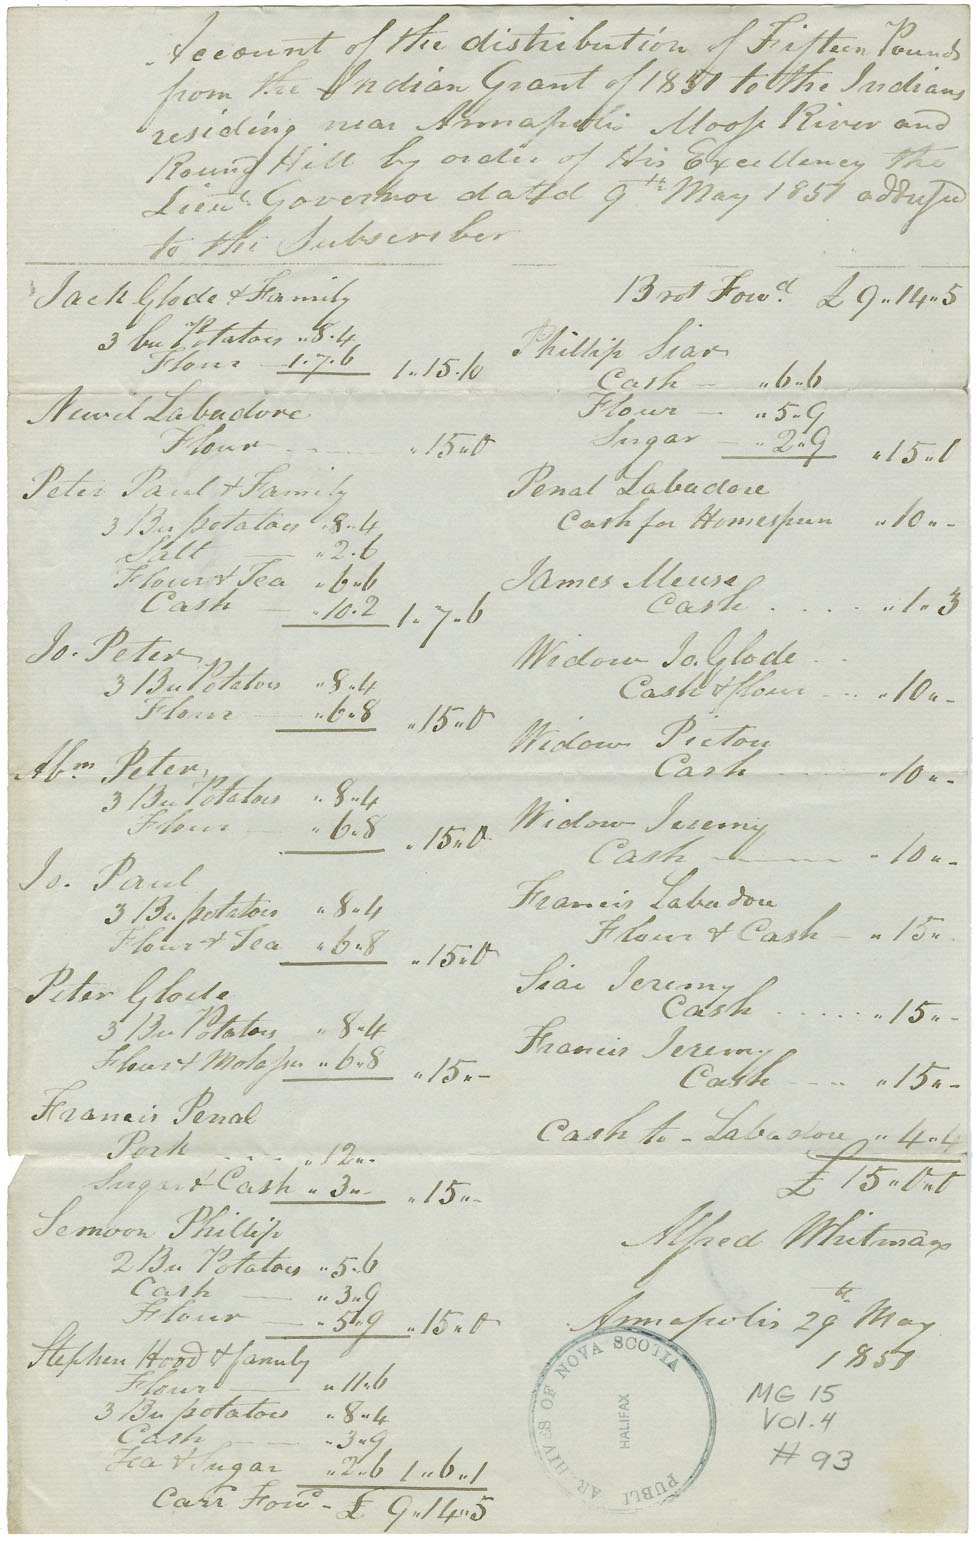 Account of the distribution of £15 from Indian Grant of 1851 to Mi'kmaq at Moose River and Round Hill, Annapolis County.